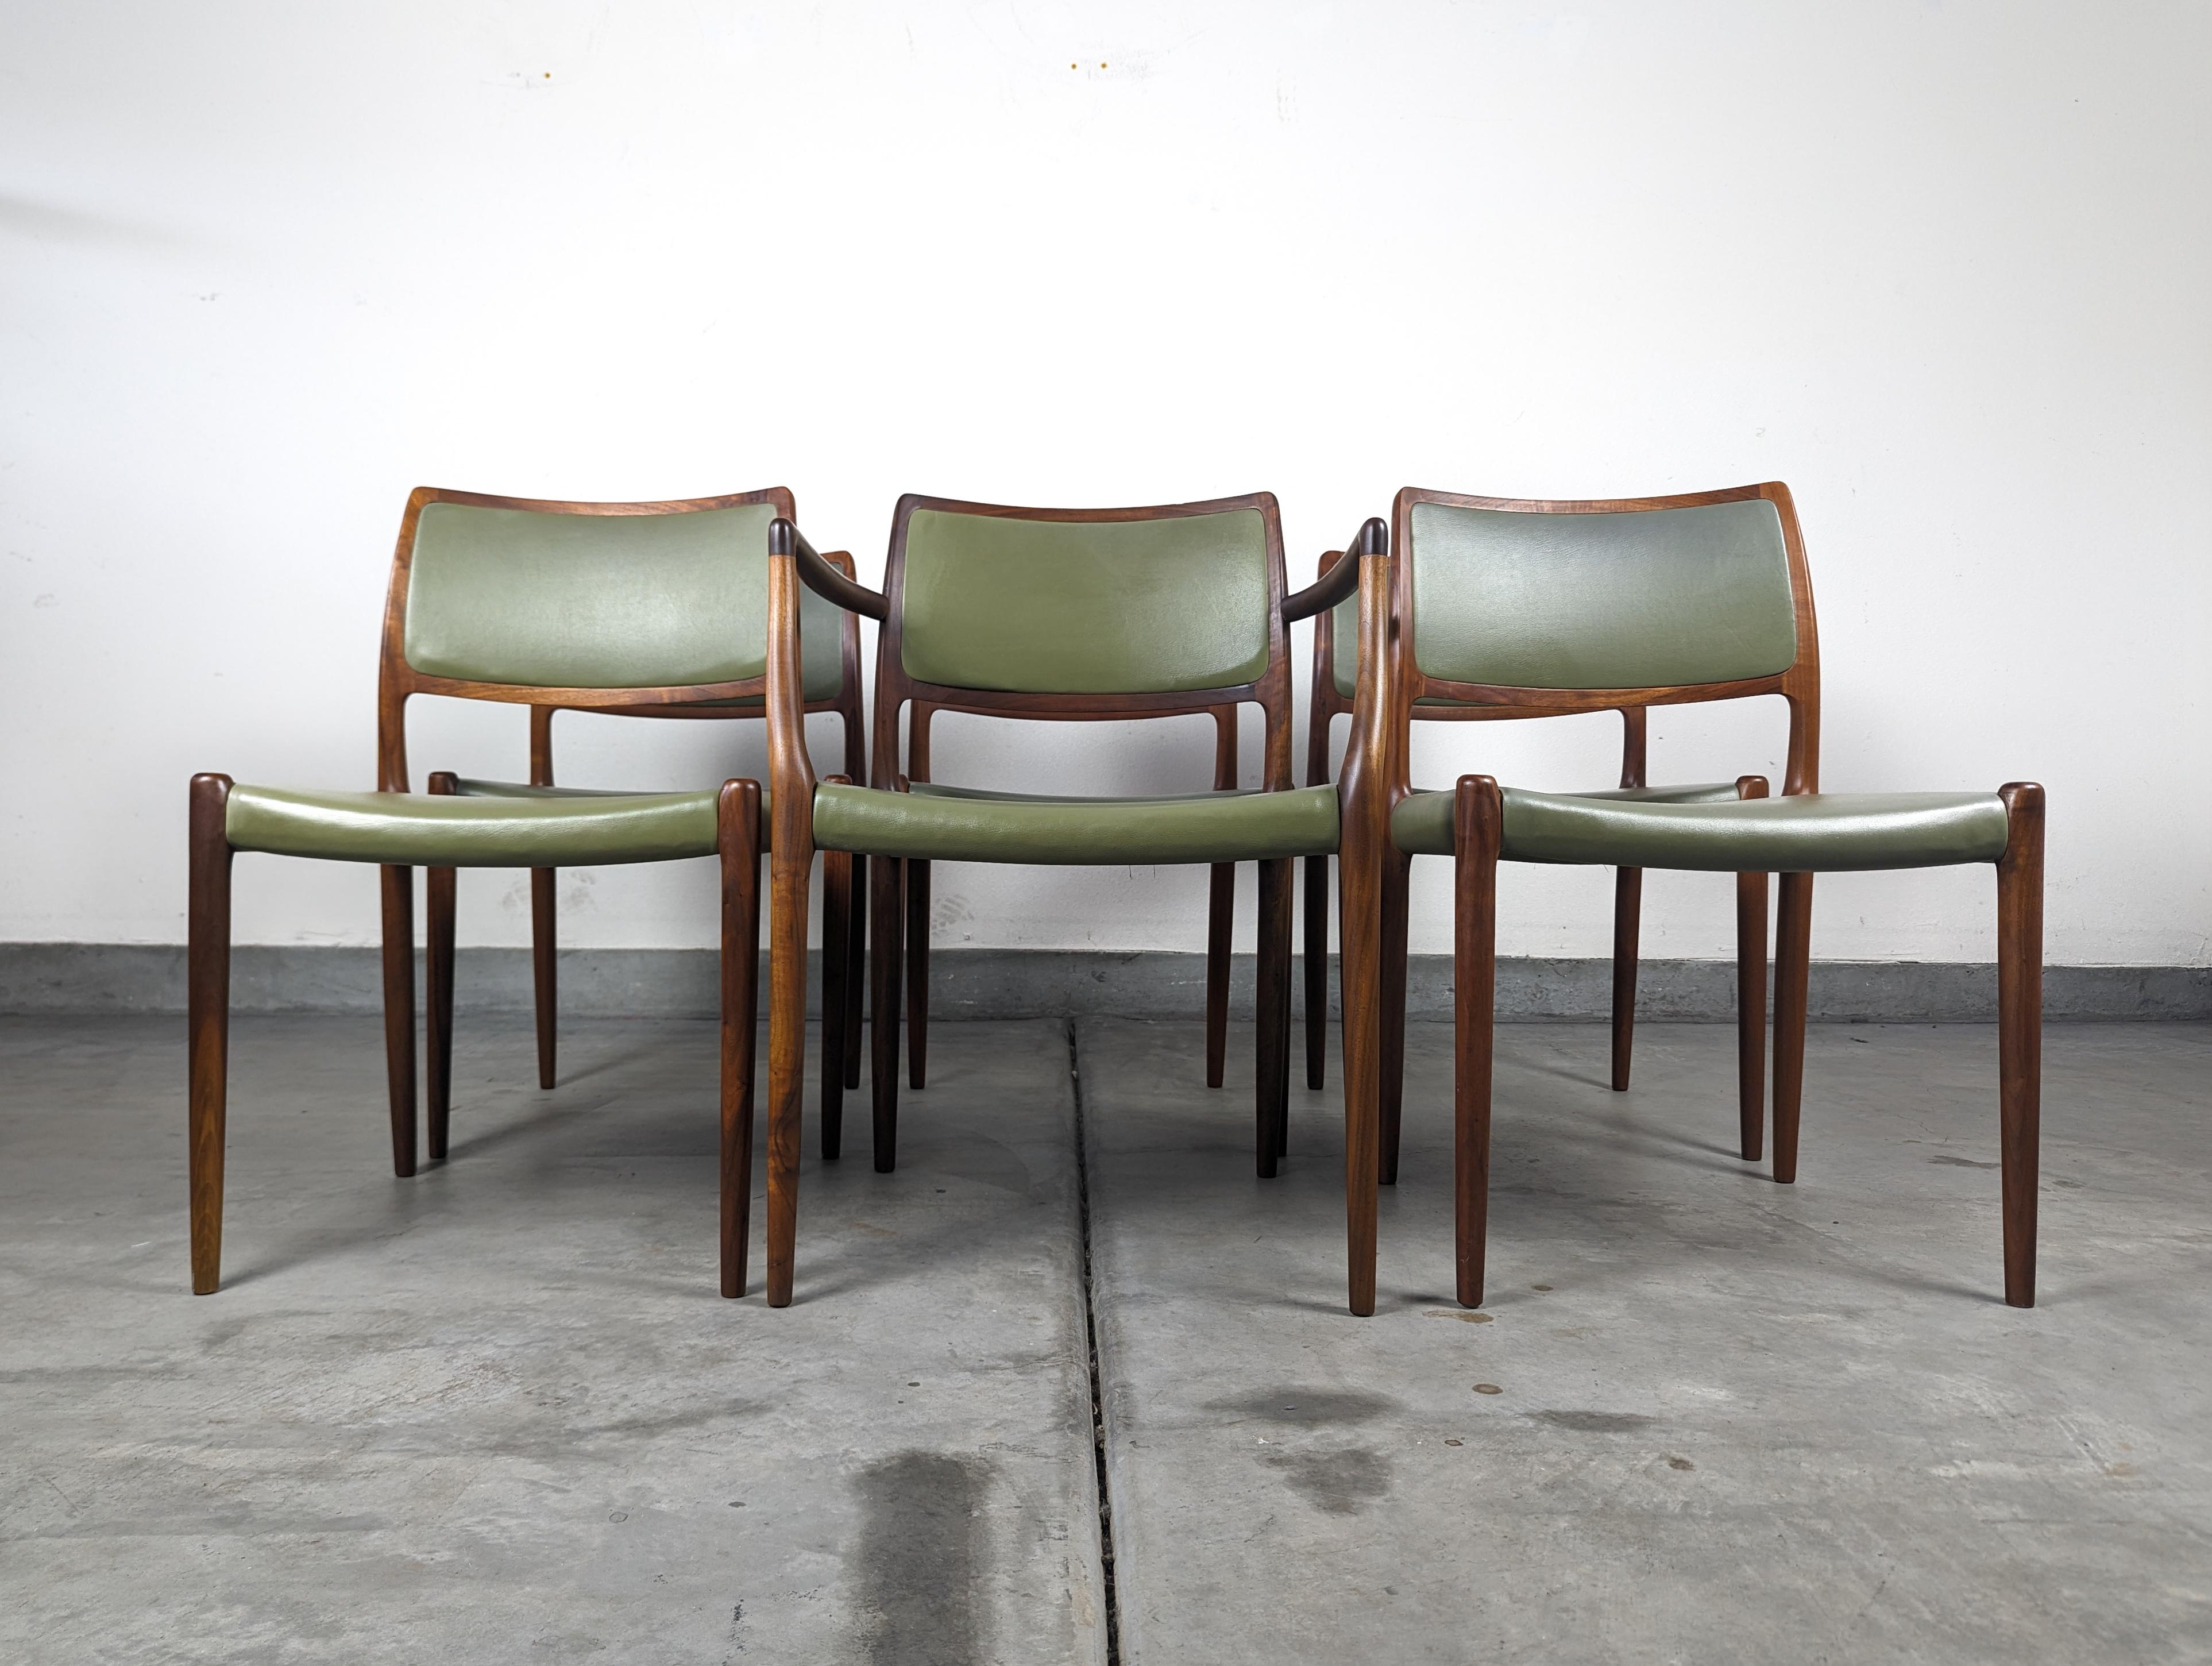 Introducing a timeless treasure for your dining space – a set of six vintage mid-century Danish modern dining chairs designed by the legendary Niels Otto Møller for J.L. Møller. These Model 80 chairs, originating from 1960s Denmark, boast an